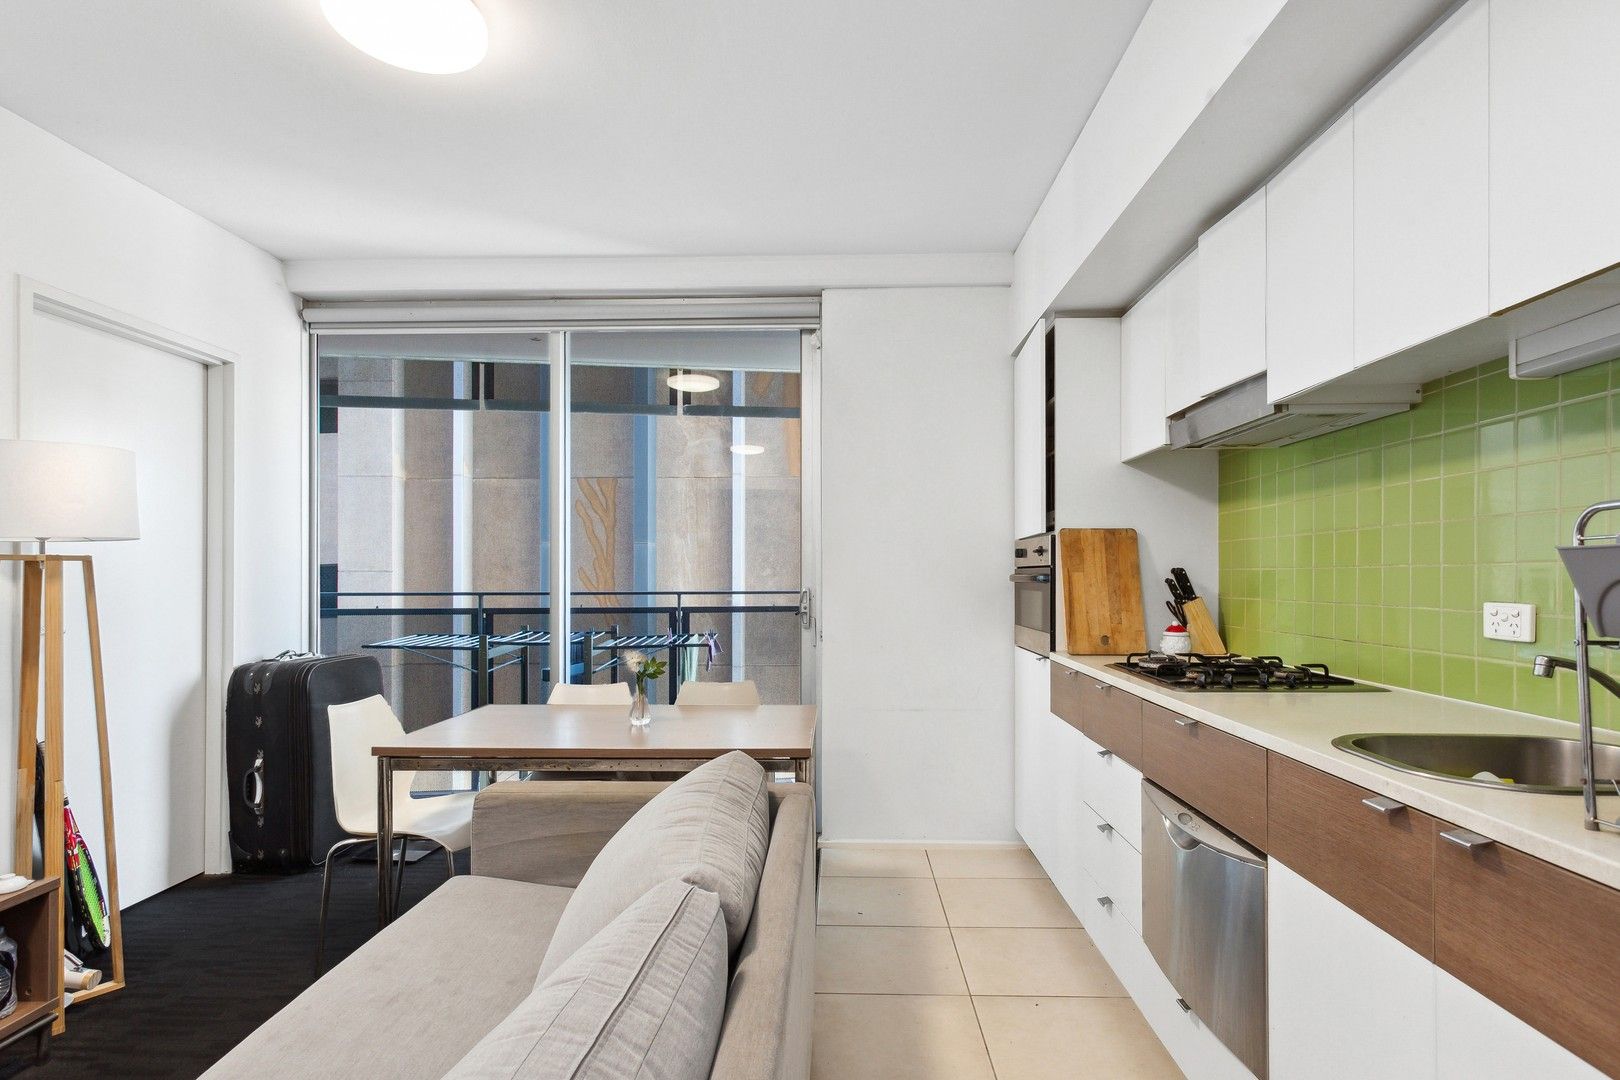 3 bedrooms Apartment / Unit / Flat in 63/34 Austin Street ADELAIDE SA, 5000